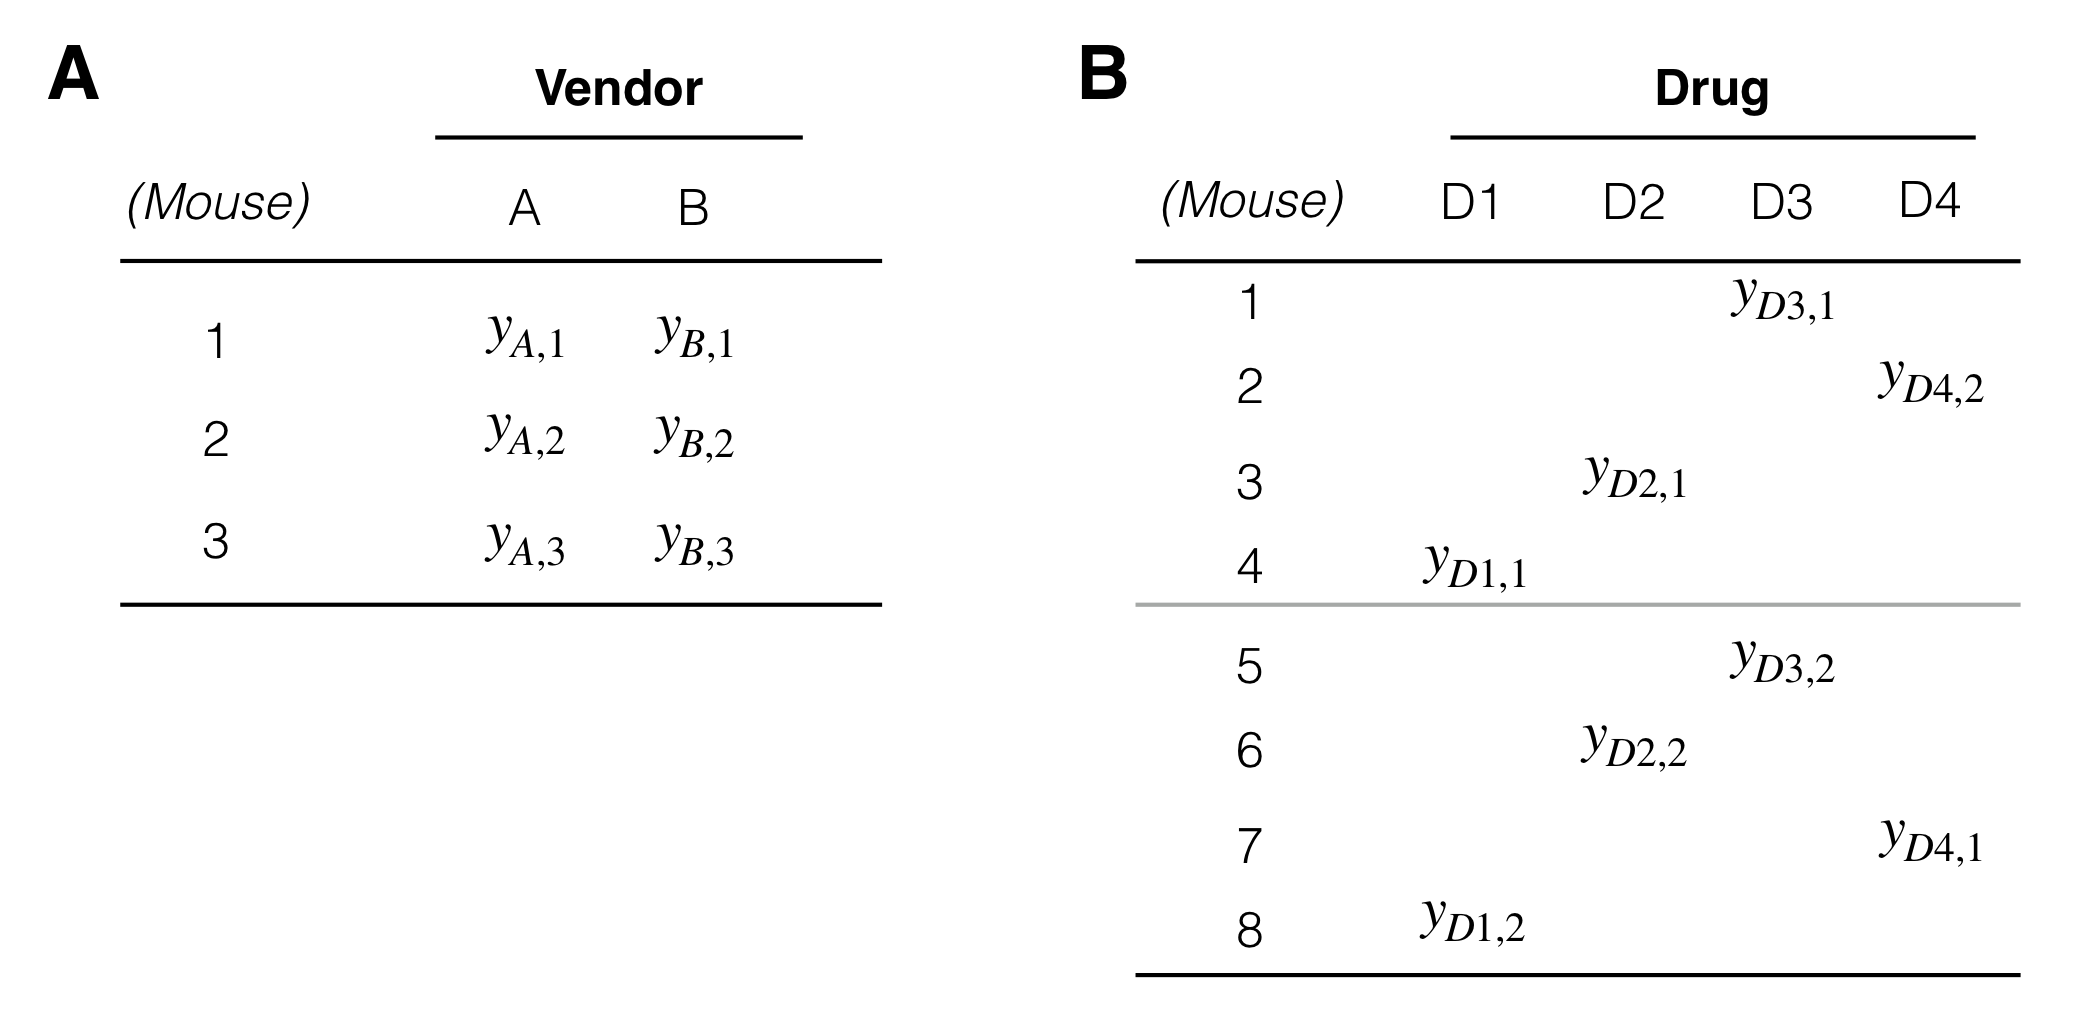 Examples of data layouts. A: Factors Vendor and Mouse are crossed. B: Factor Mouse is nested in factor Drug.